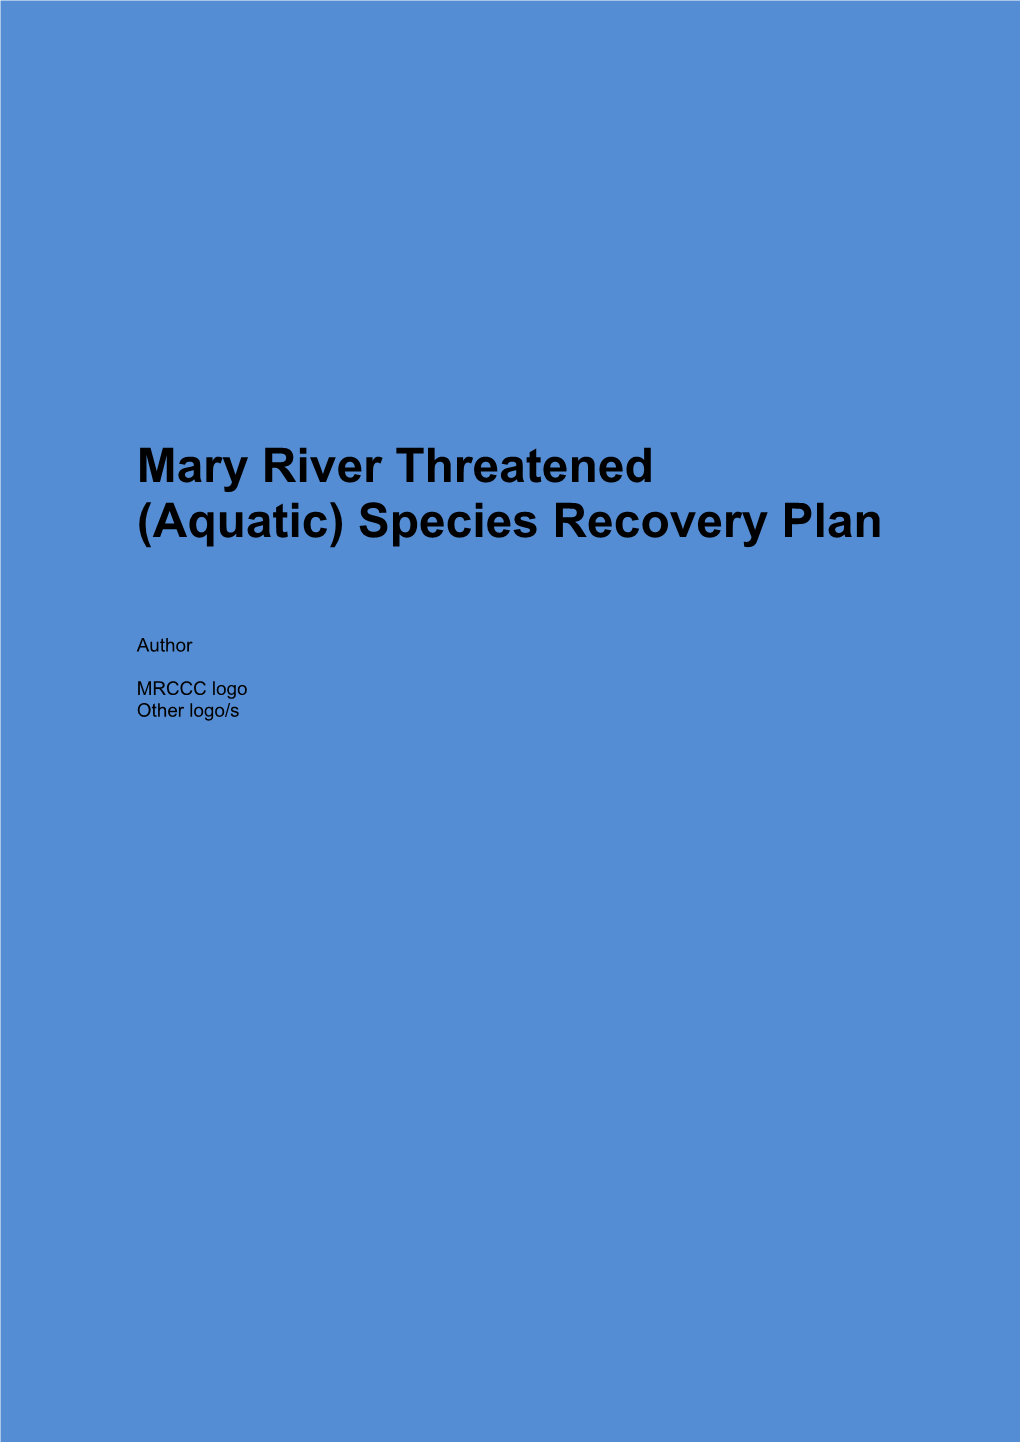 Mary River Threatened (Aquatic) Species Recovery Plan